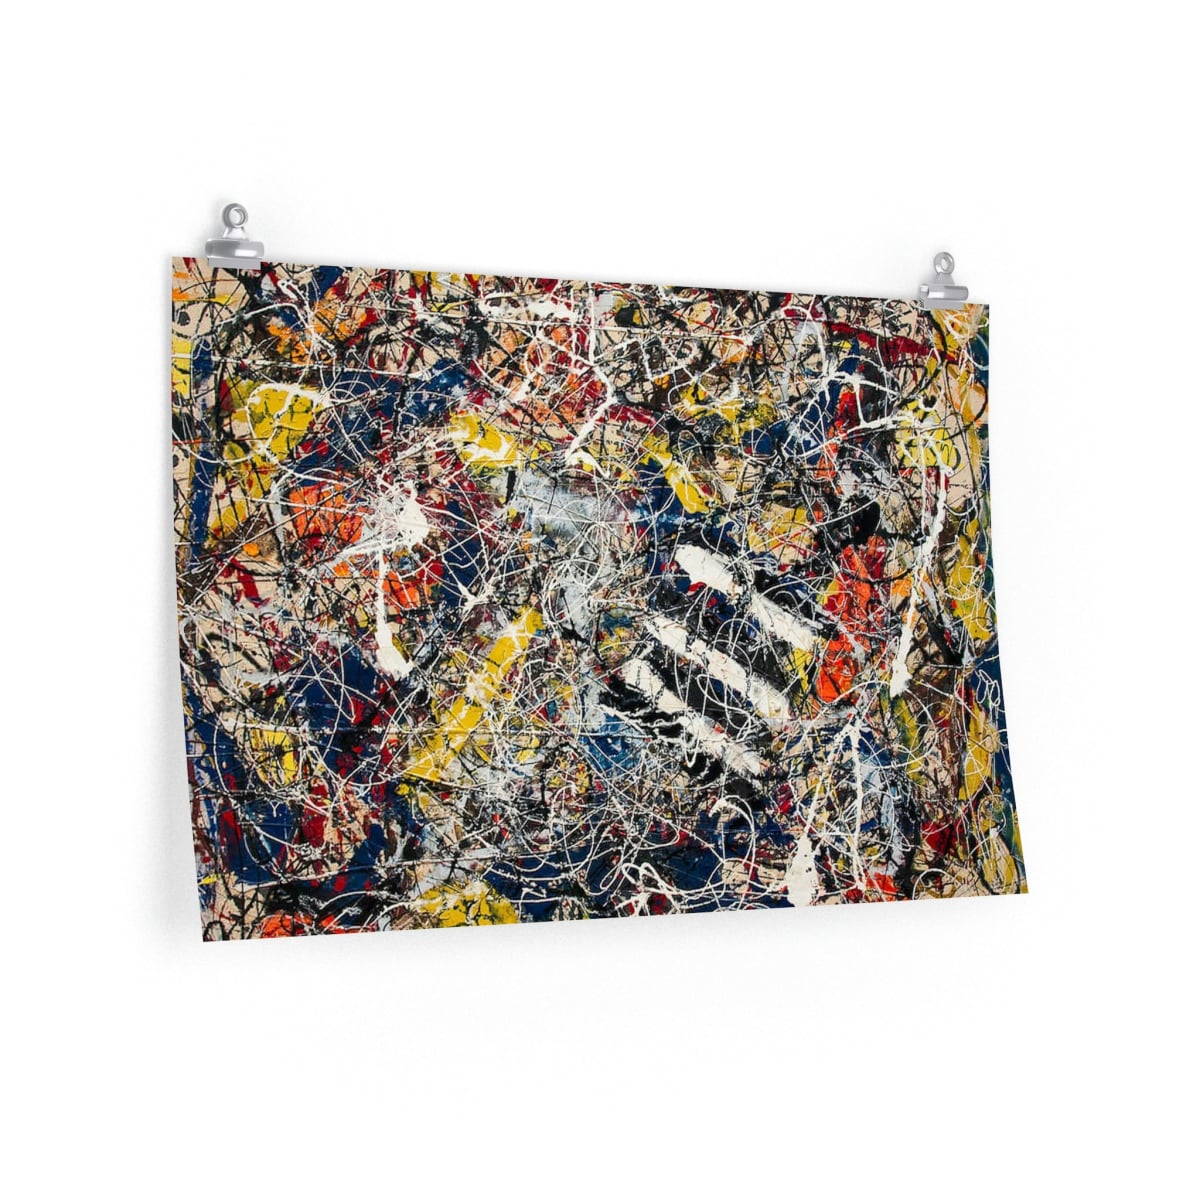 Number 17A by Jackson Pollock Art Premium Posters